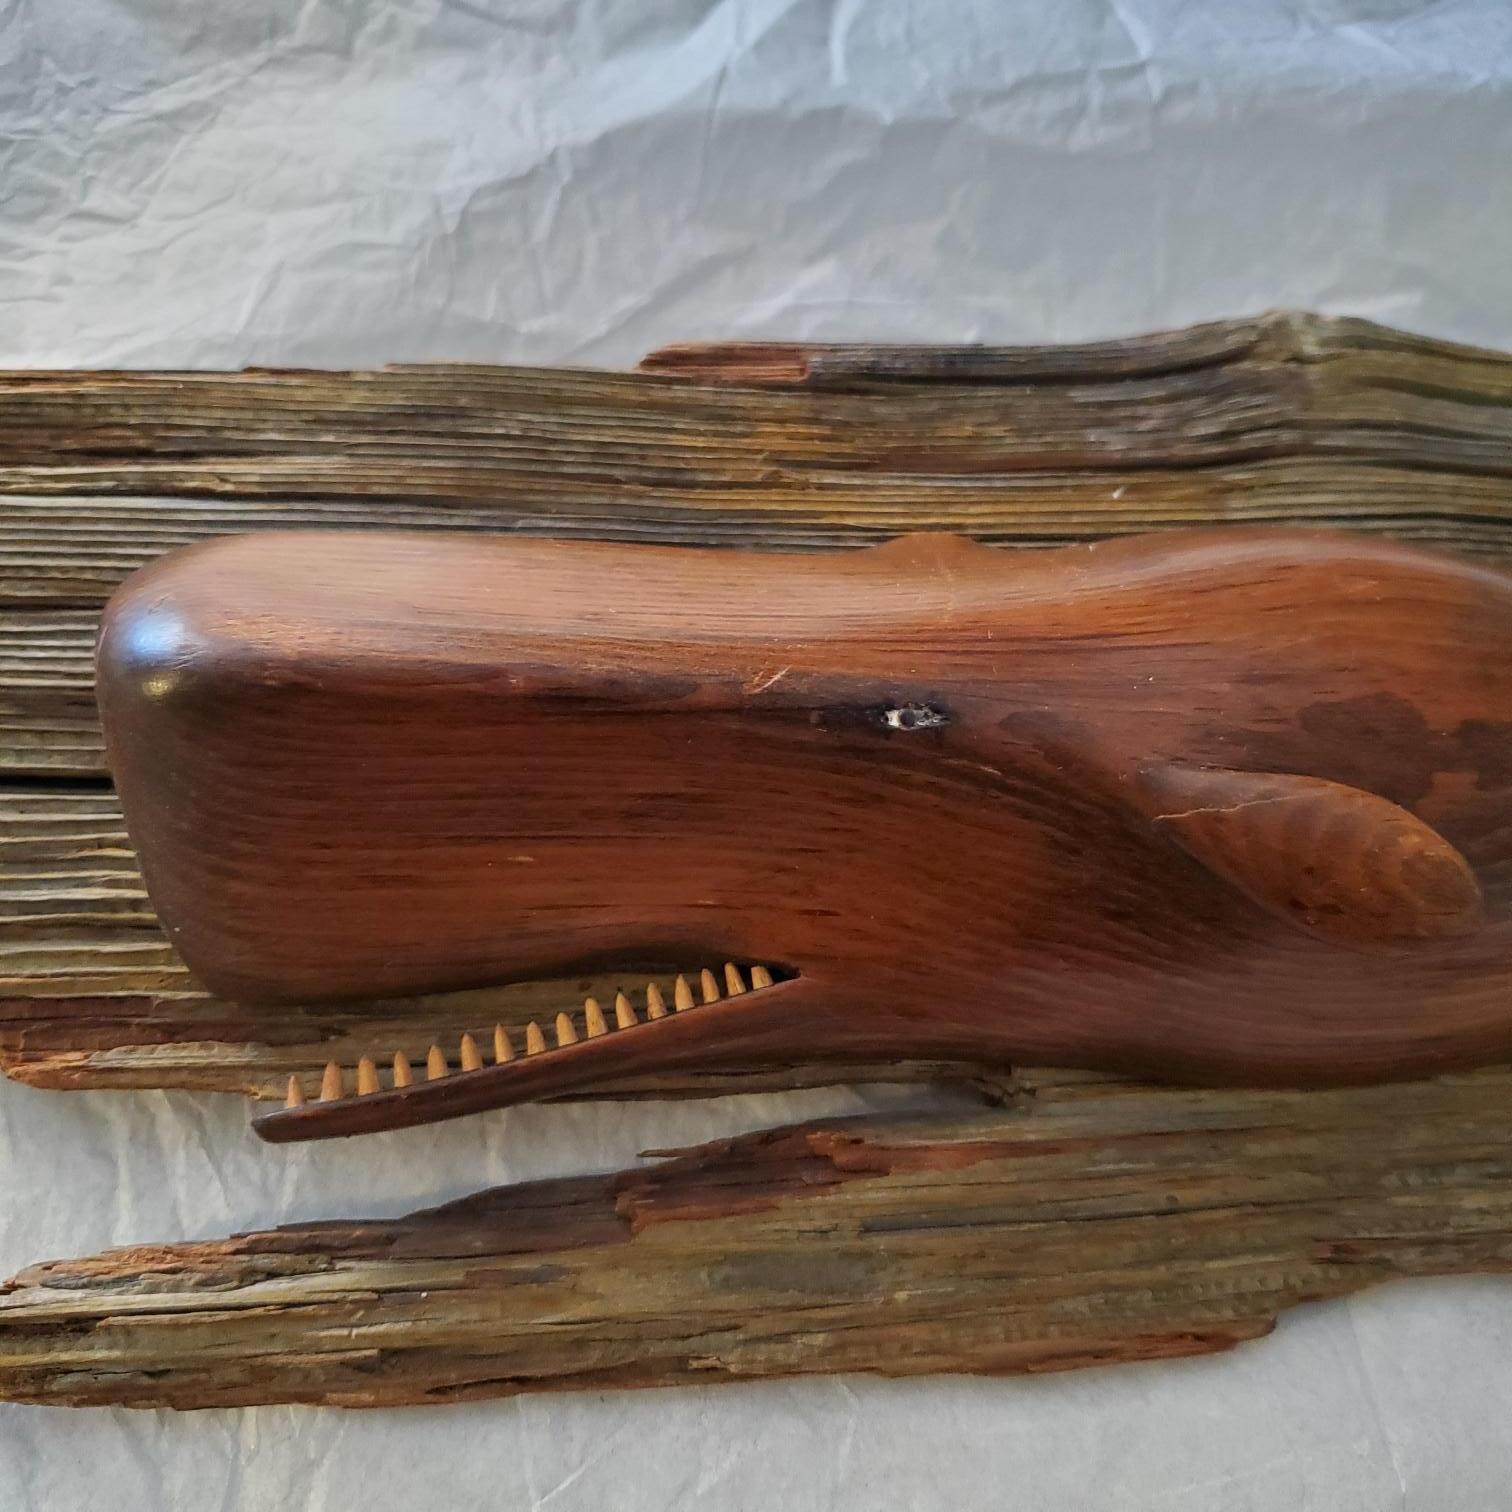 Vintage hand carved sperm whale by Nantucket artist William J. Dickson, 1967, a smoothly carved pine sperm whale with upraised flukes and open mouth exposing teeth, mounted on weathered barn board plank, signed and dated W.J. Dickson, 1967 on the